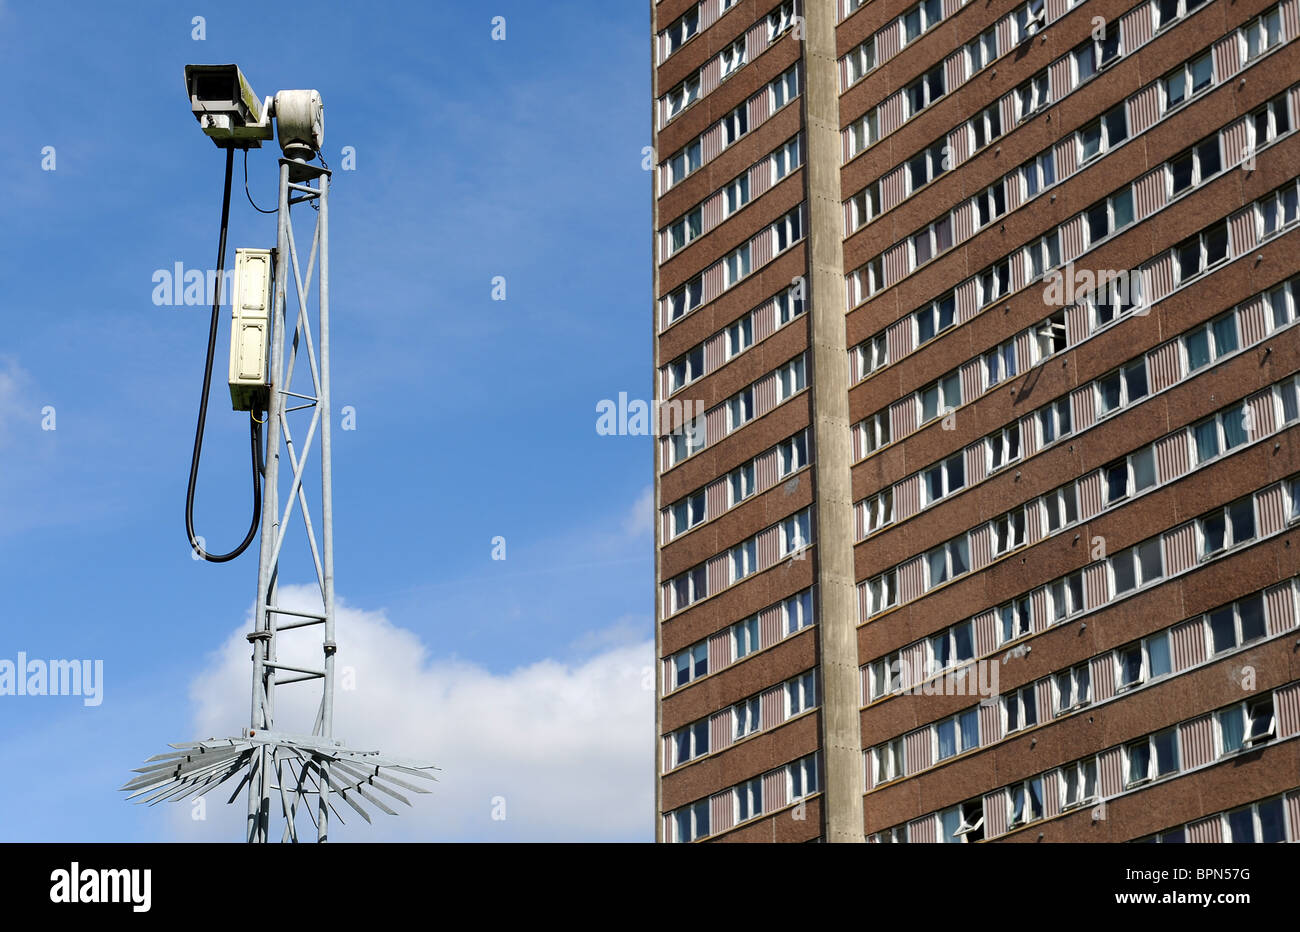 Security camera in operation outside high rise flats in Toryglen, Glasgow Stock Photo